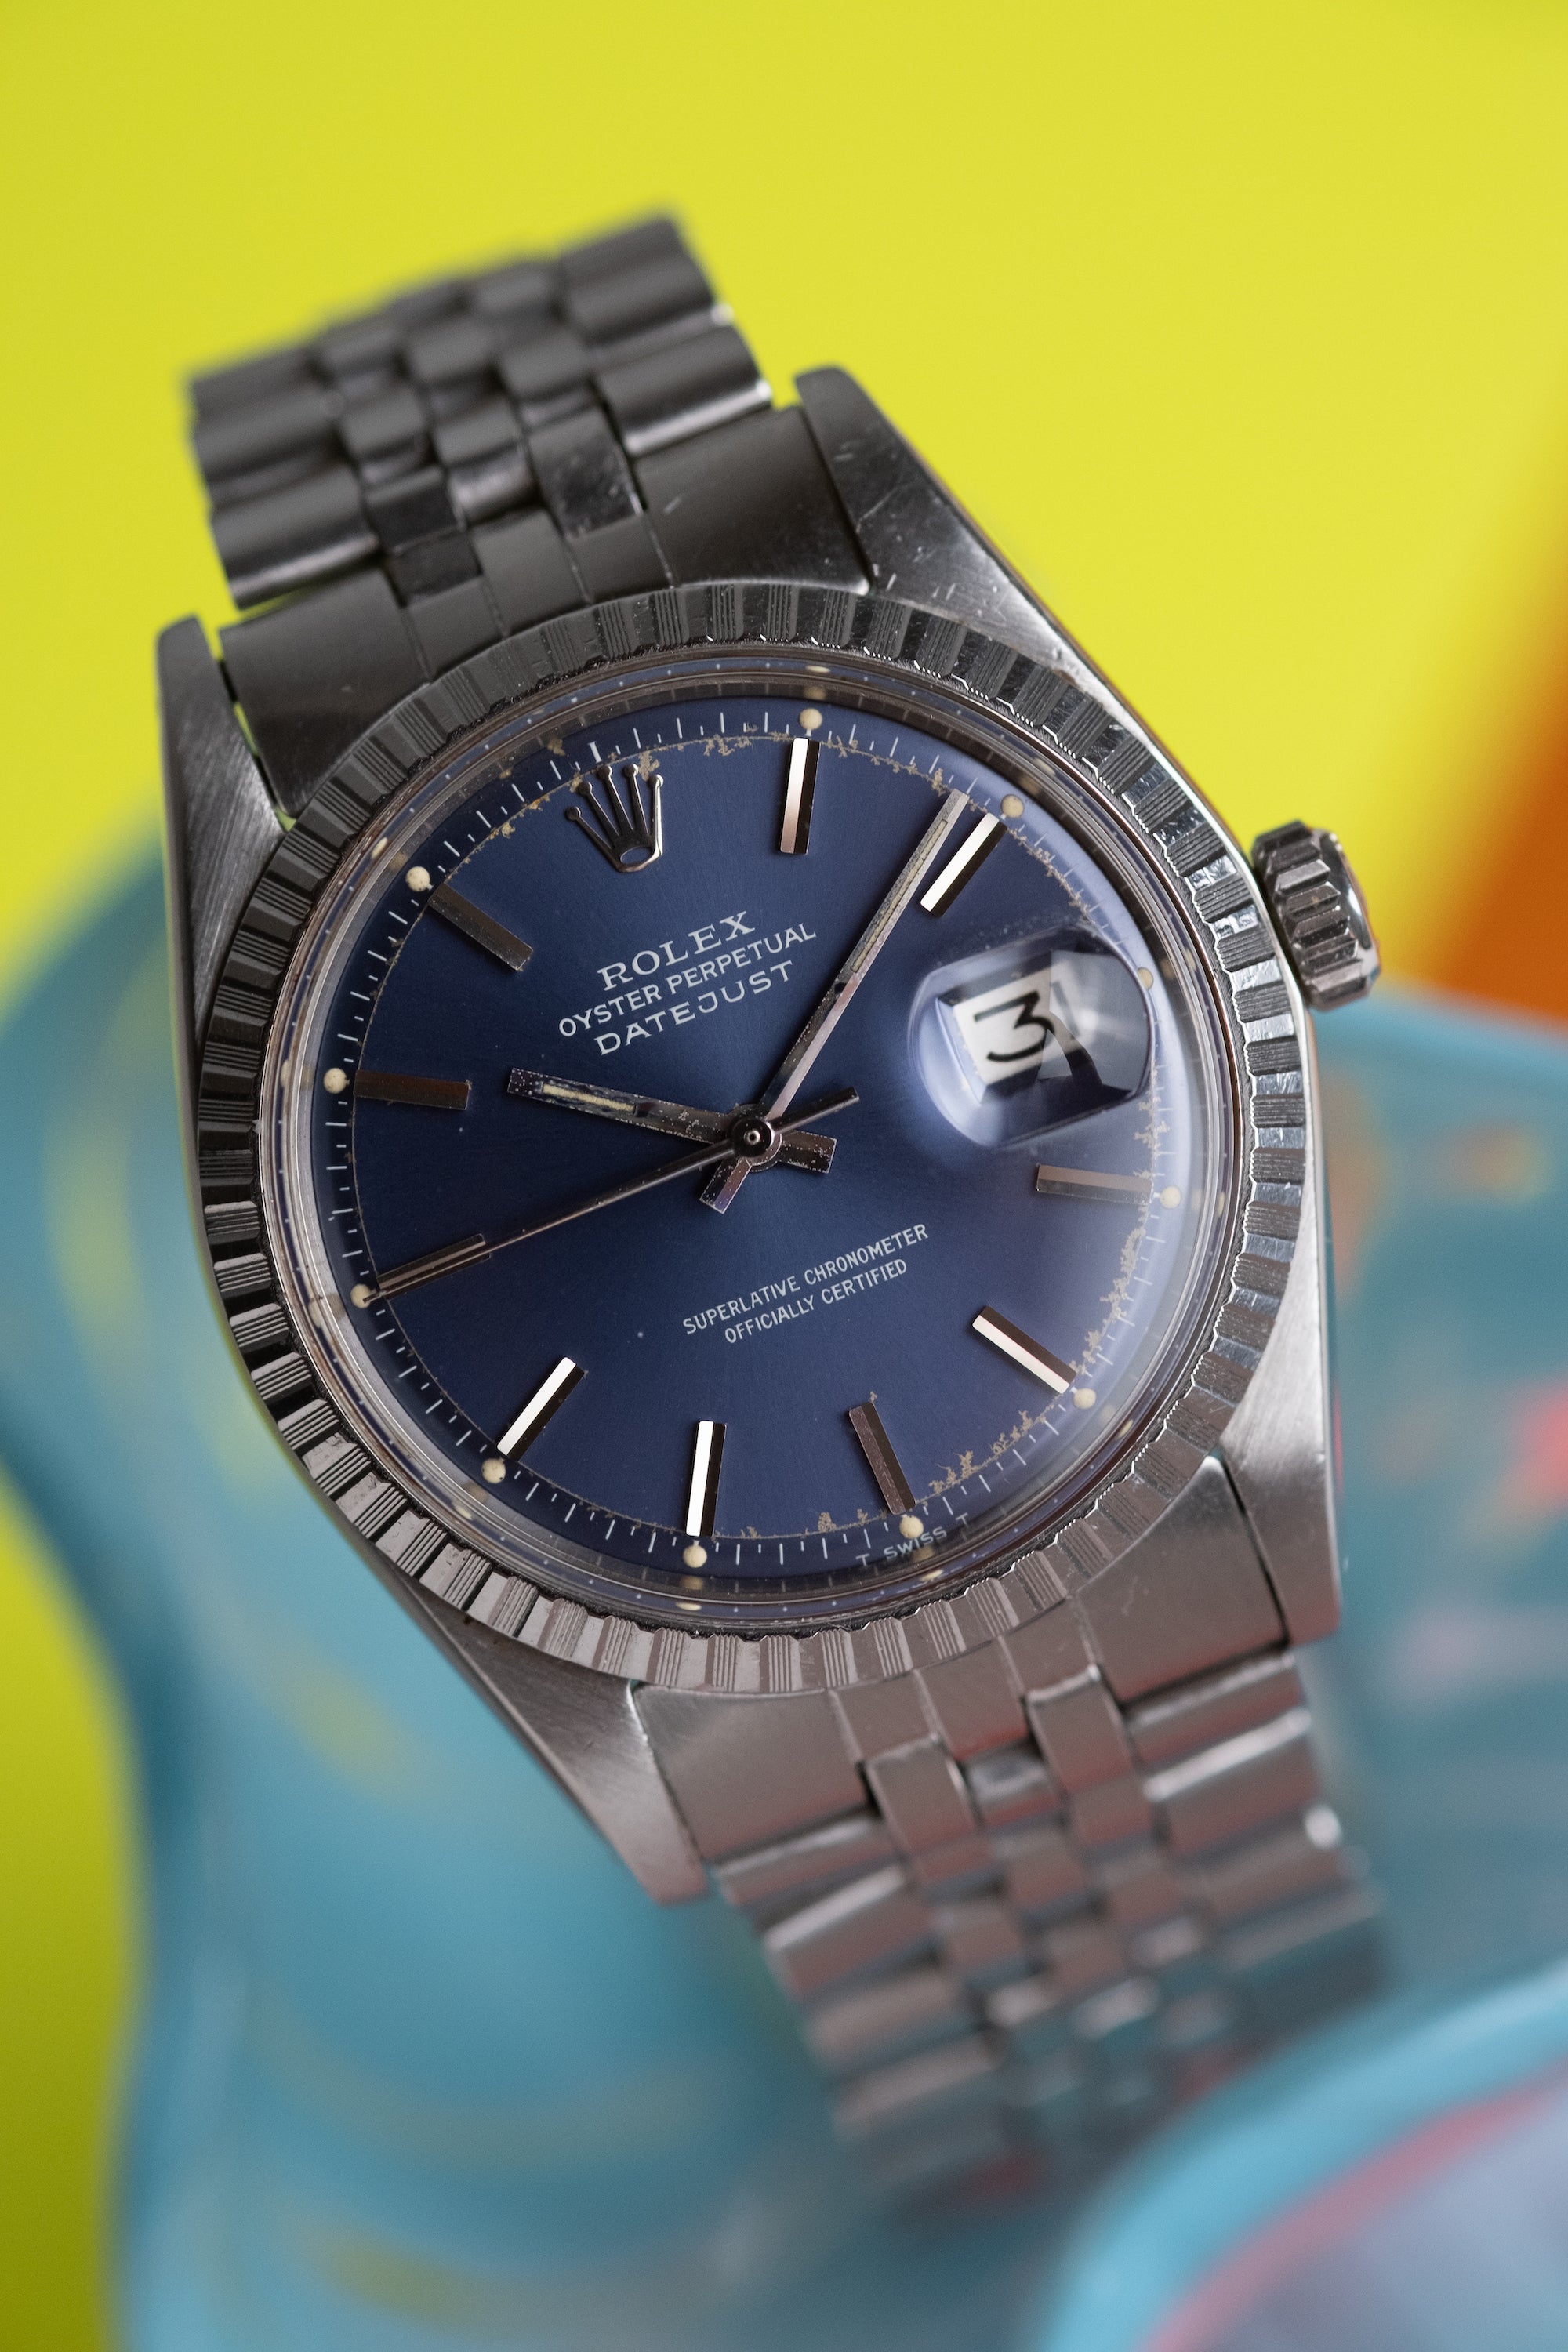 ROLEX Oyster Perpetual Datejust Ref. 1603 Blue Dial (1973)